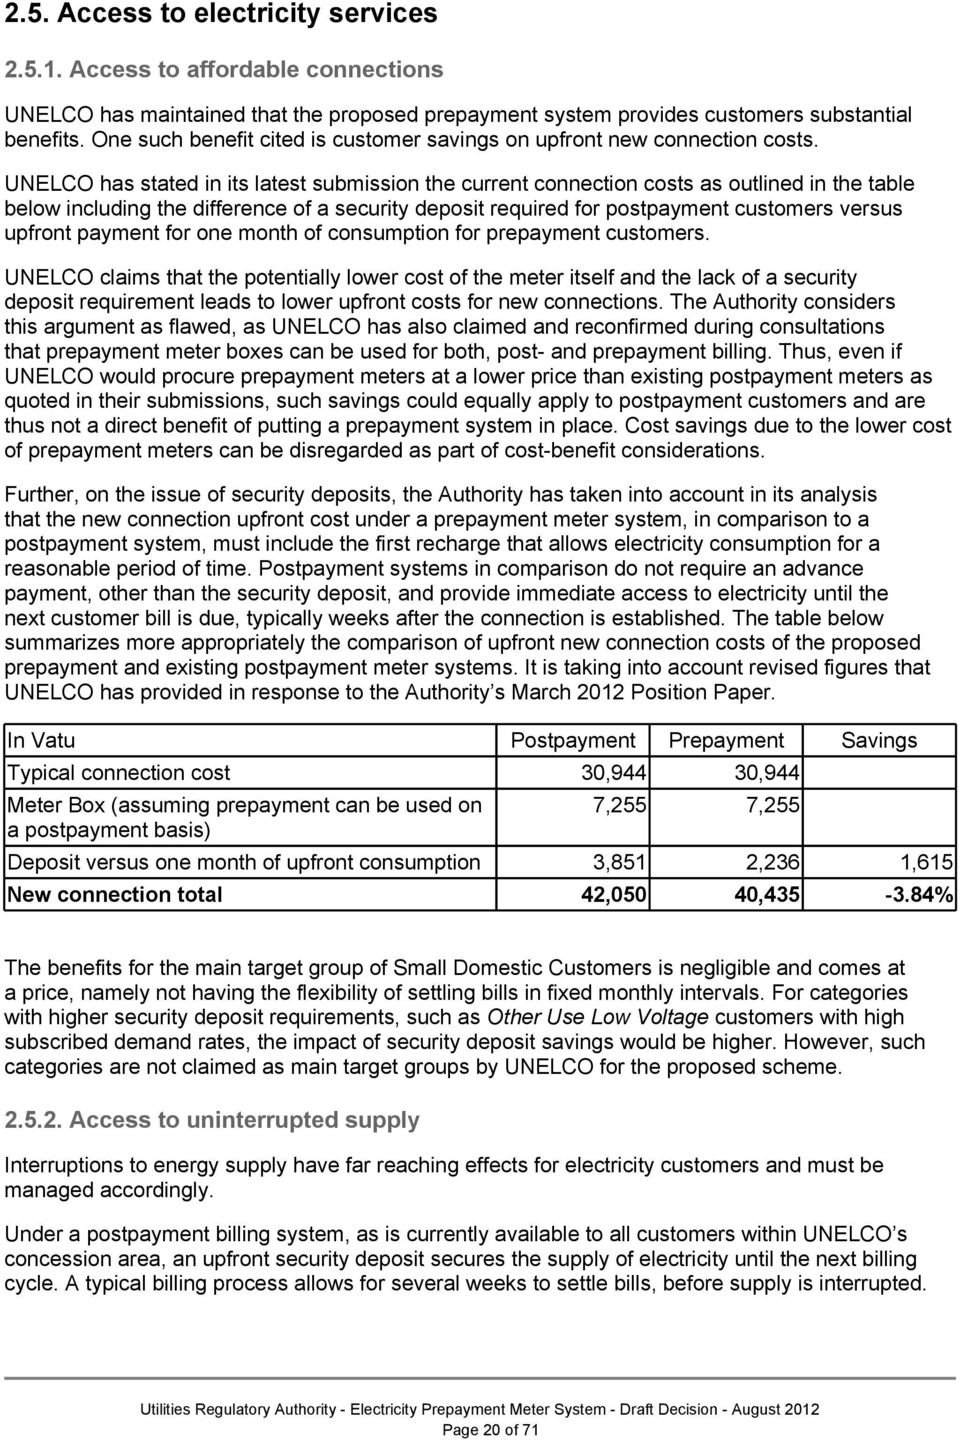 UNELCO has stated in its latest submission the current connection costs as outlined in the table below including the difference of a security deposit required for postpayment customers versus upfront